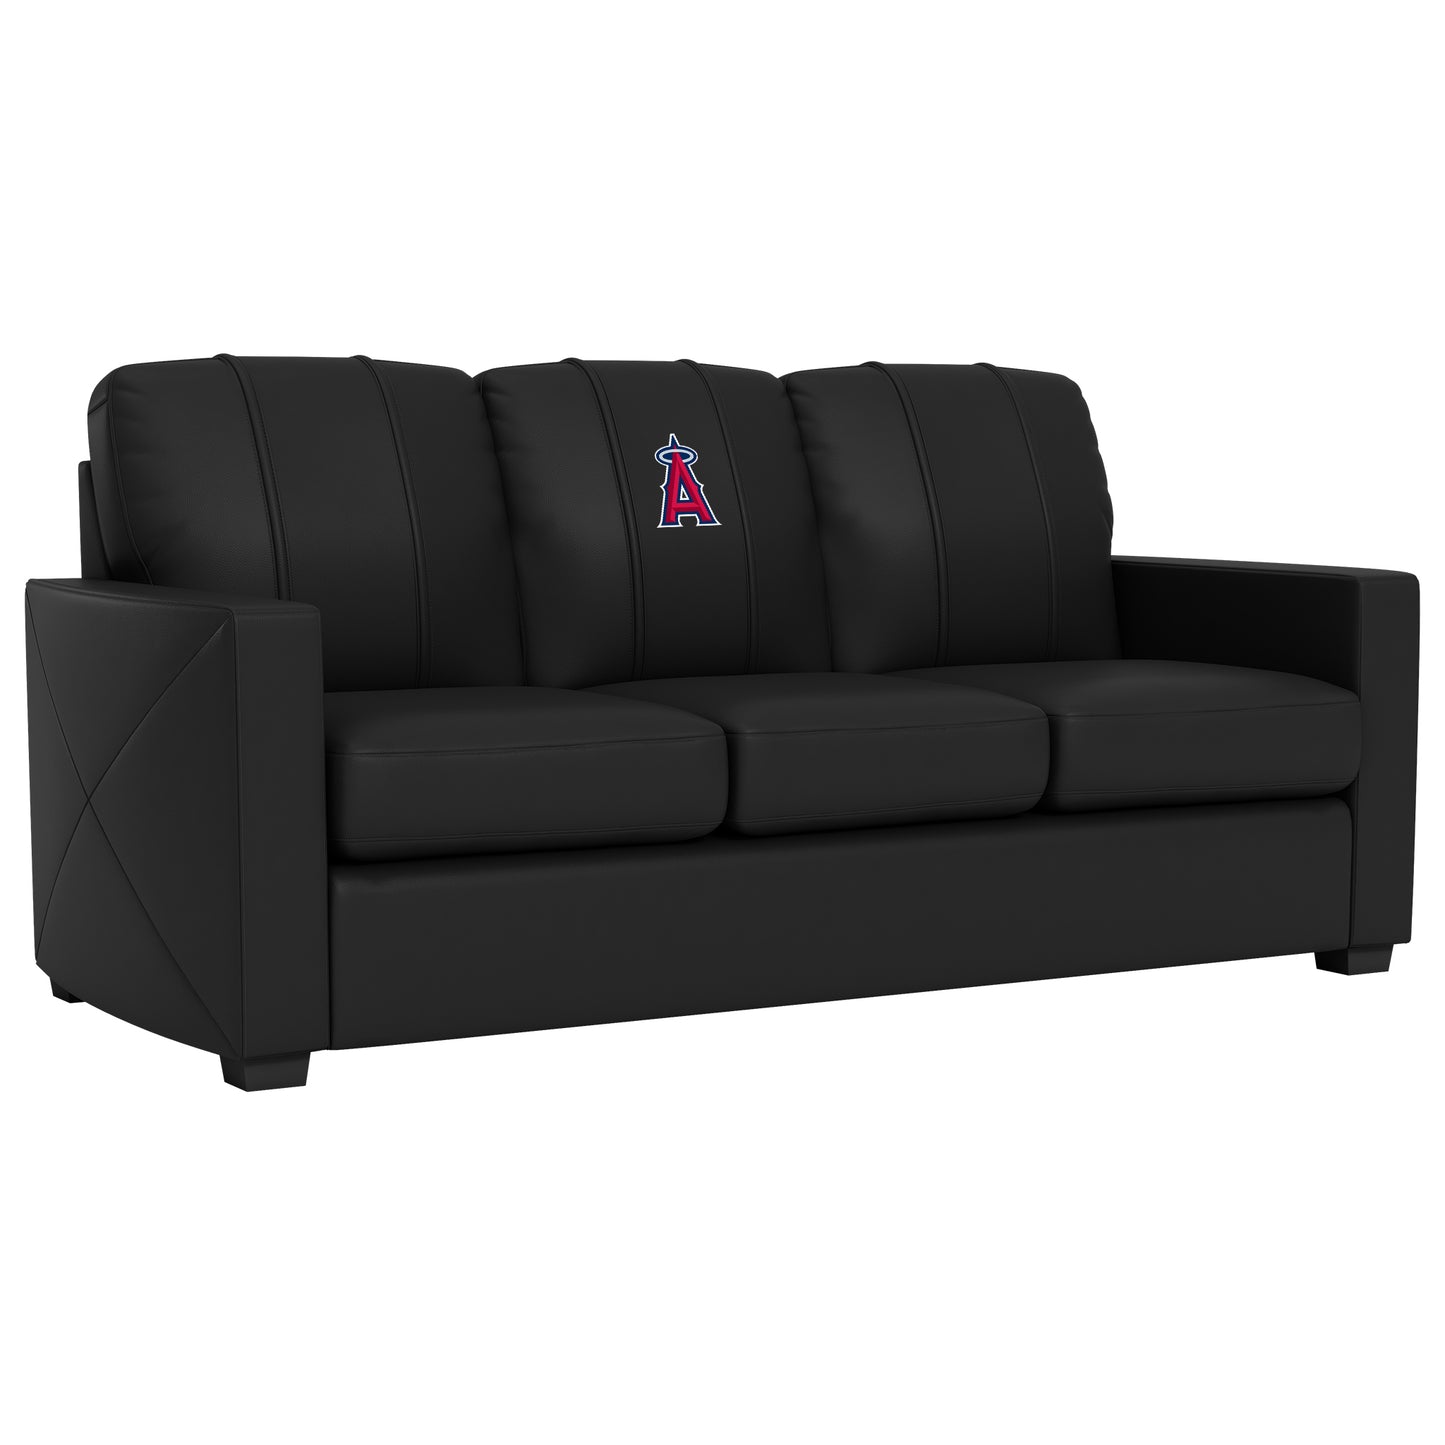 Silver Sofa with Los Angeles Angels Logo